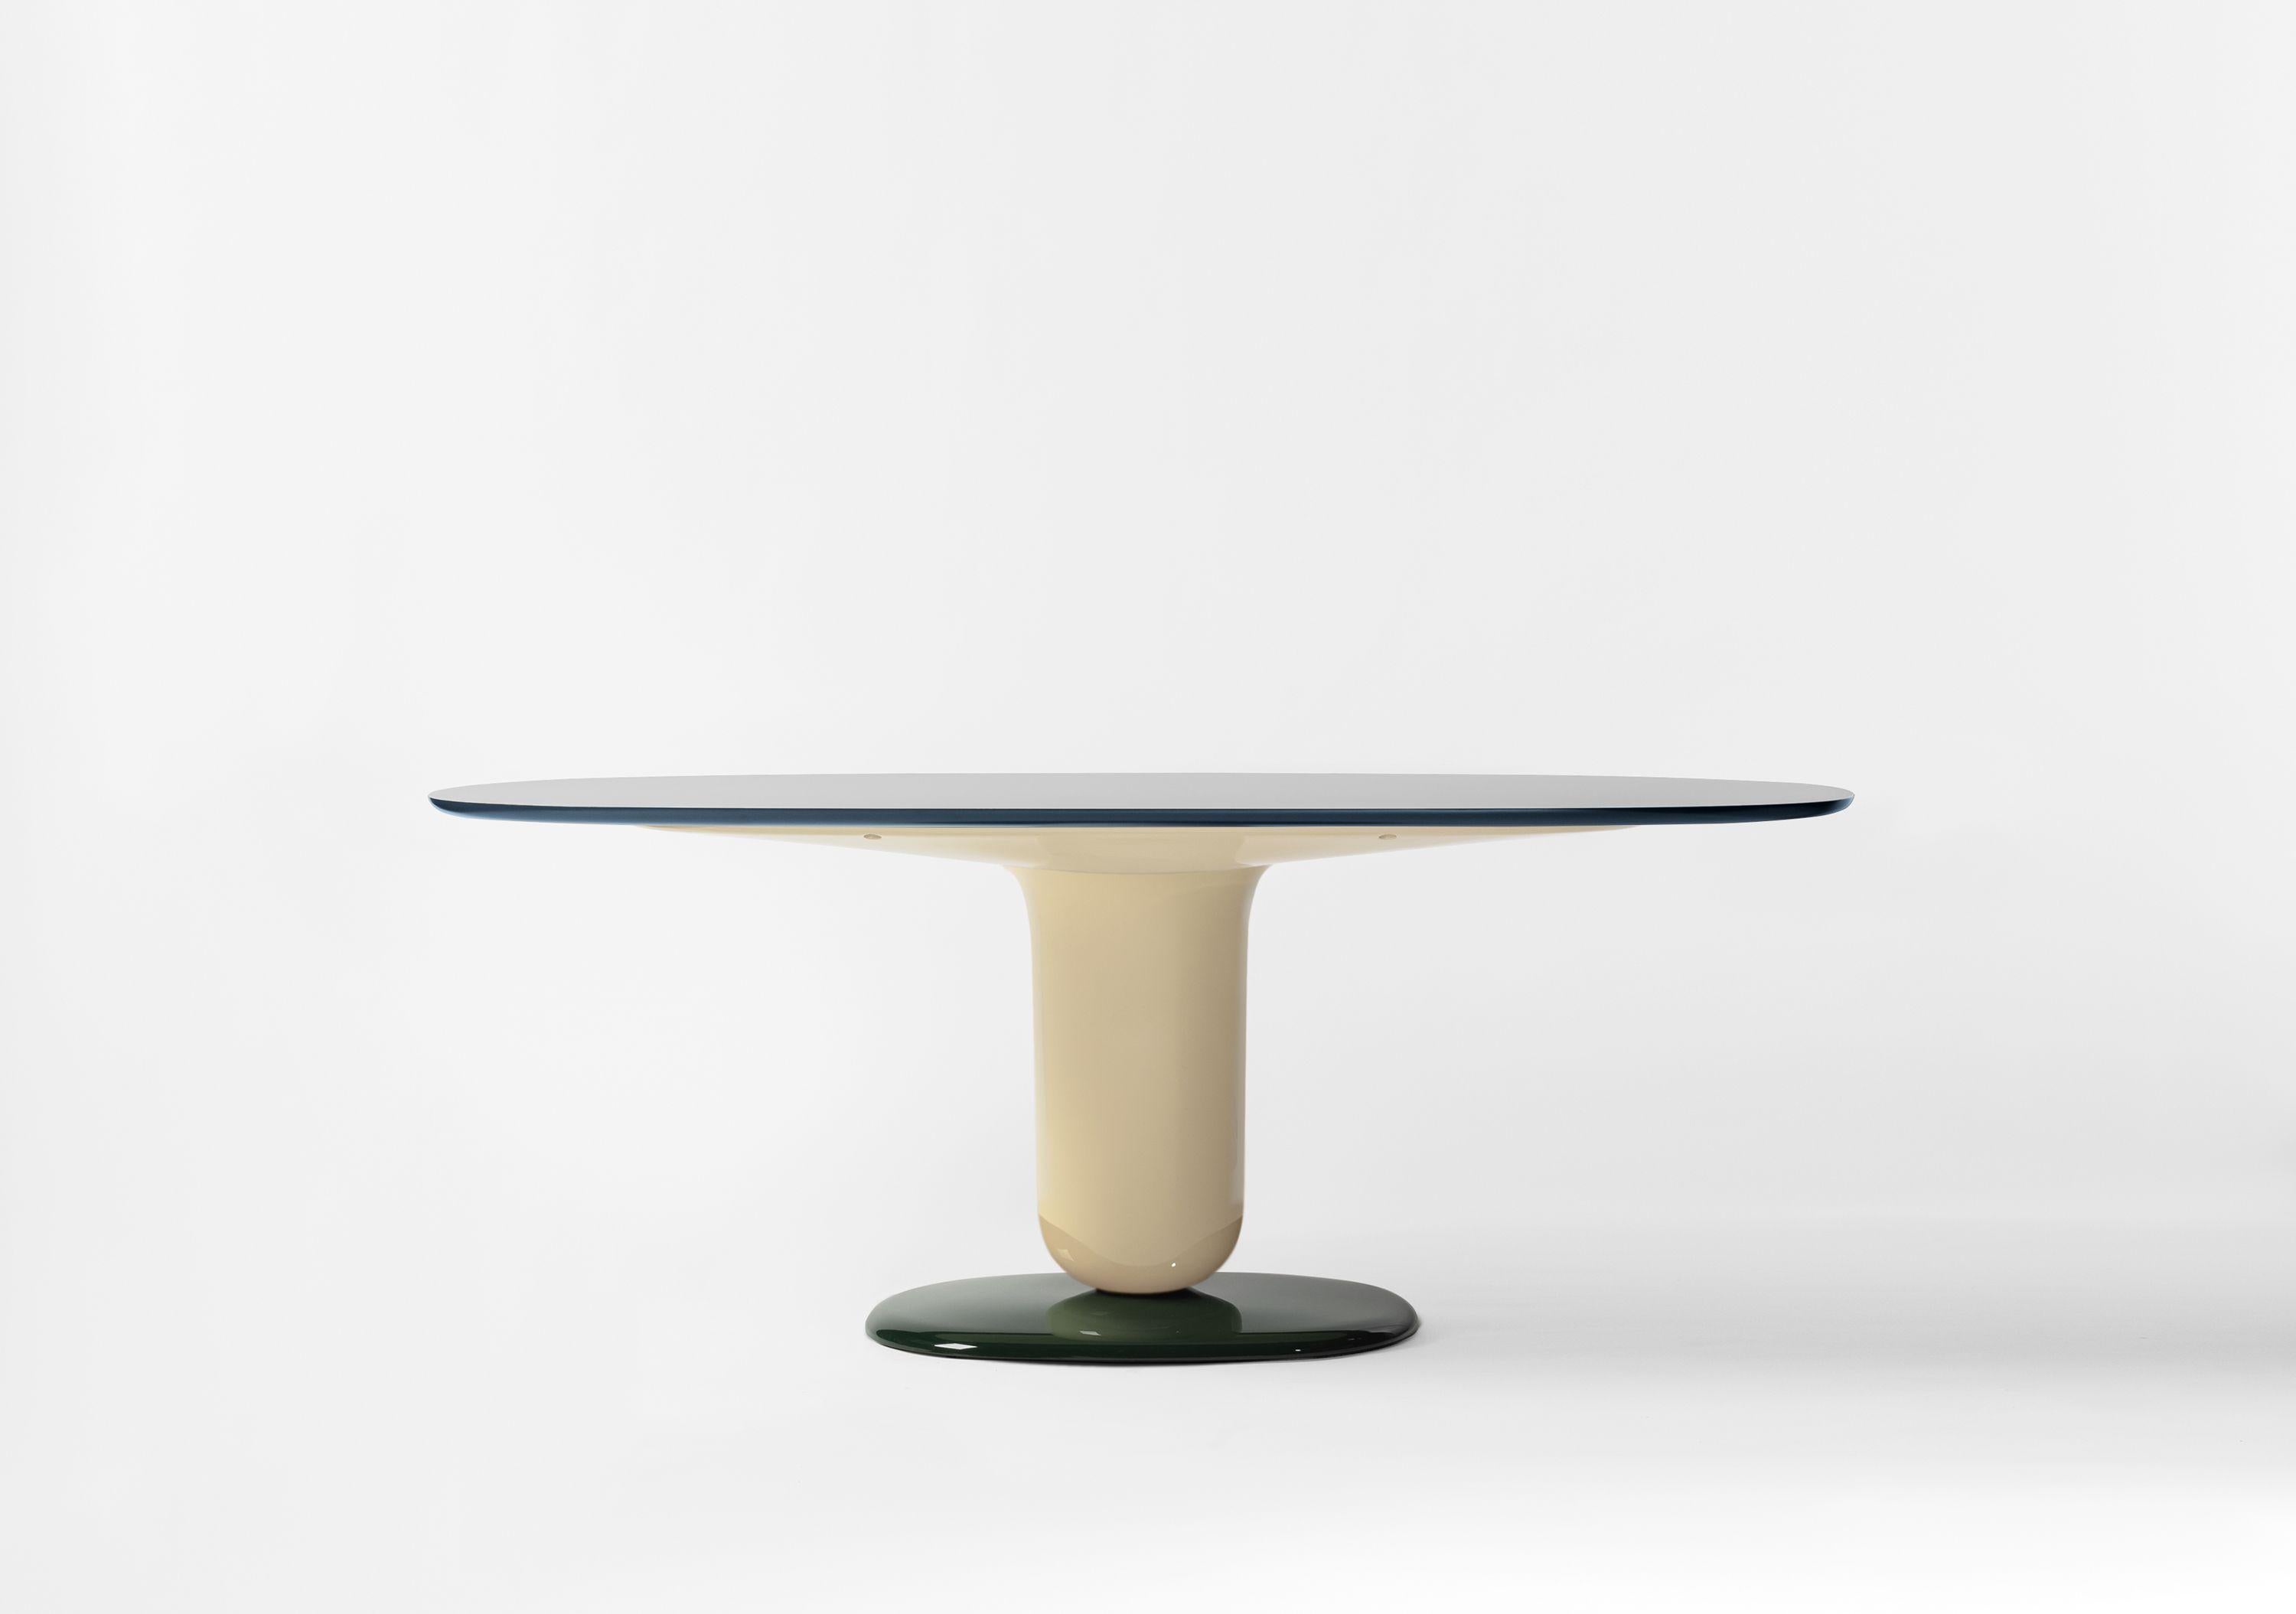 Multicolor Ivory 190 dining table.

Design in 2021 by Jaime Hayon added to the Explorer collection that started in 2019.
Manufactured by BD Barcelona.

As a continuation of the playful Explorer Table series and following its elegant beauty, we are